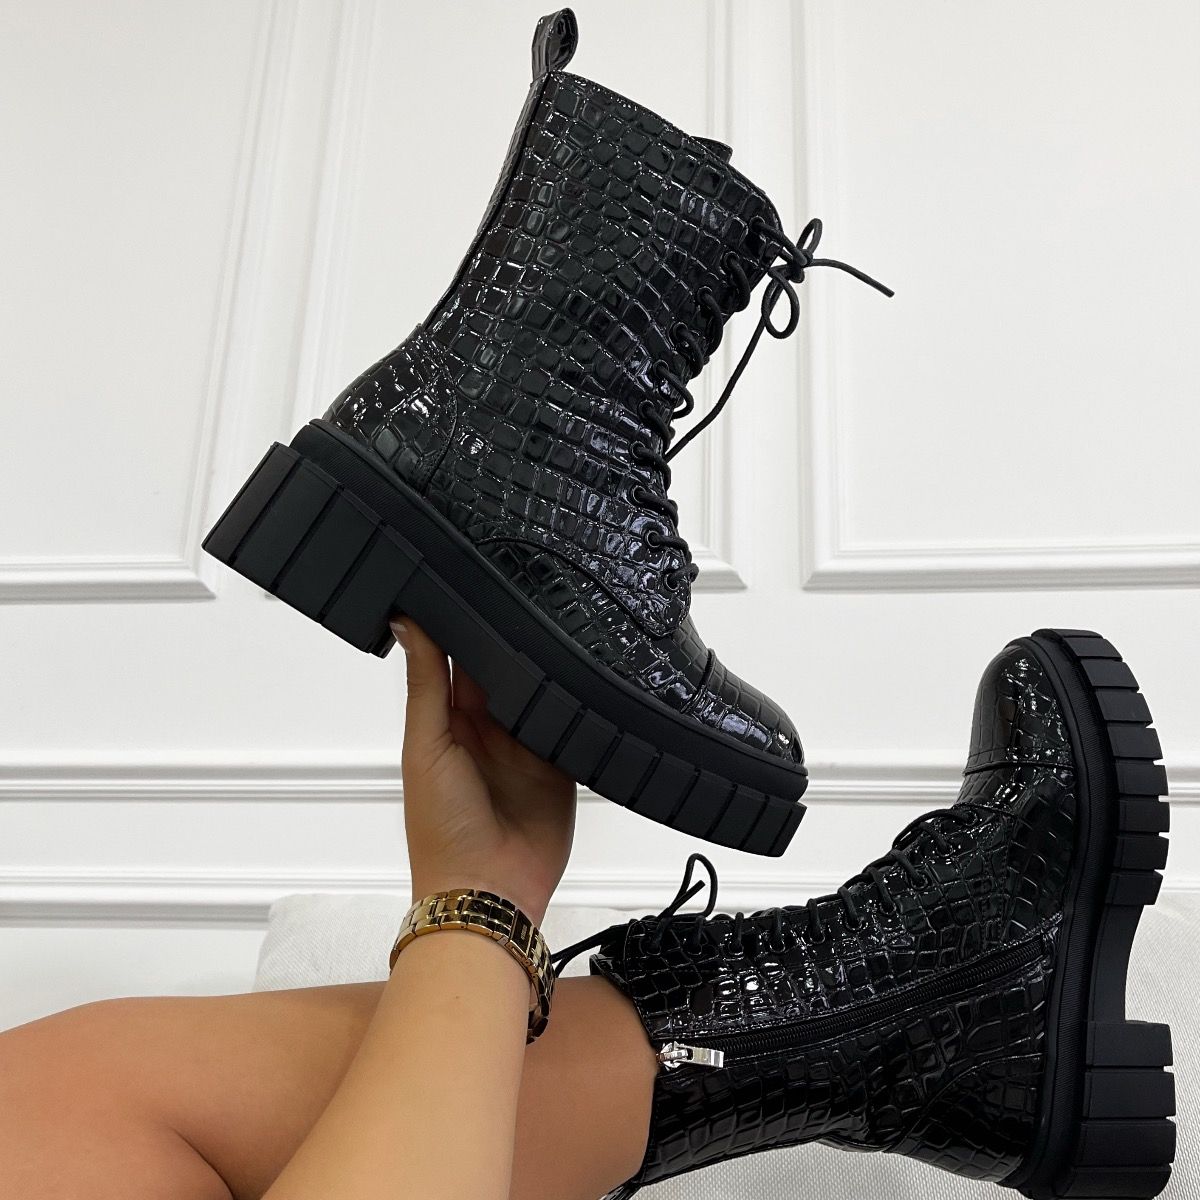 black faux croc chunky lace up boots